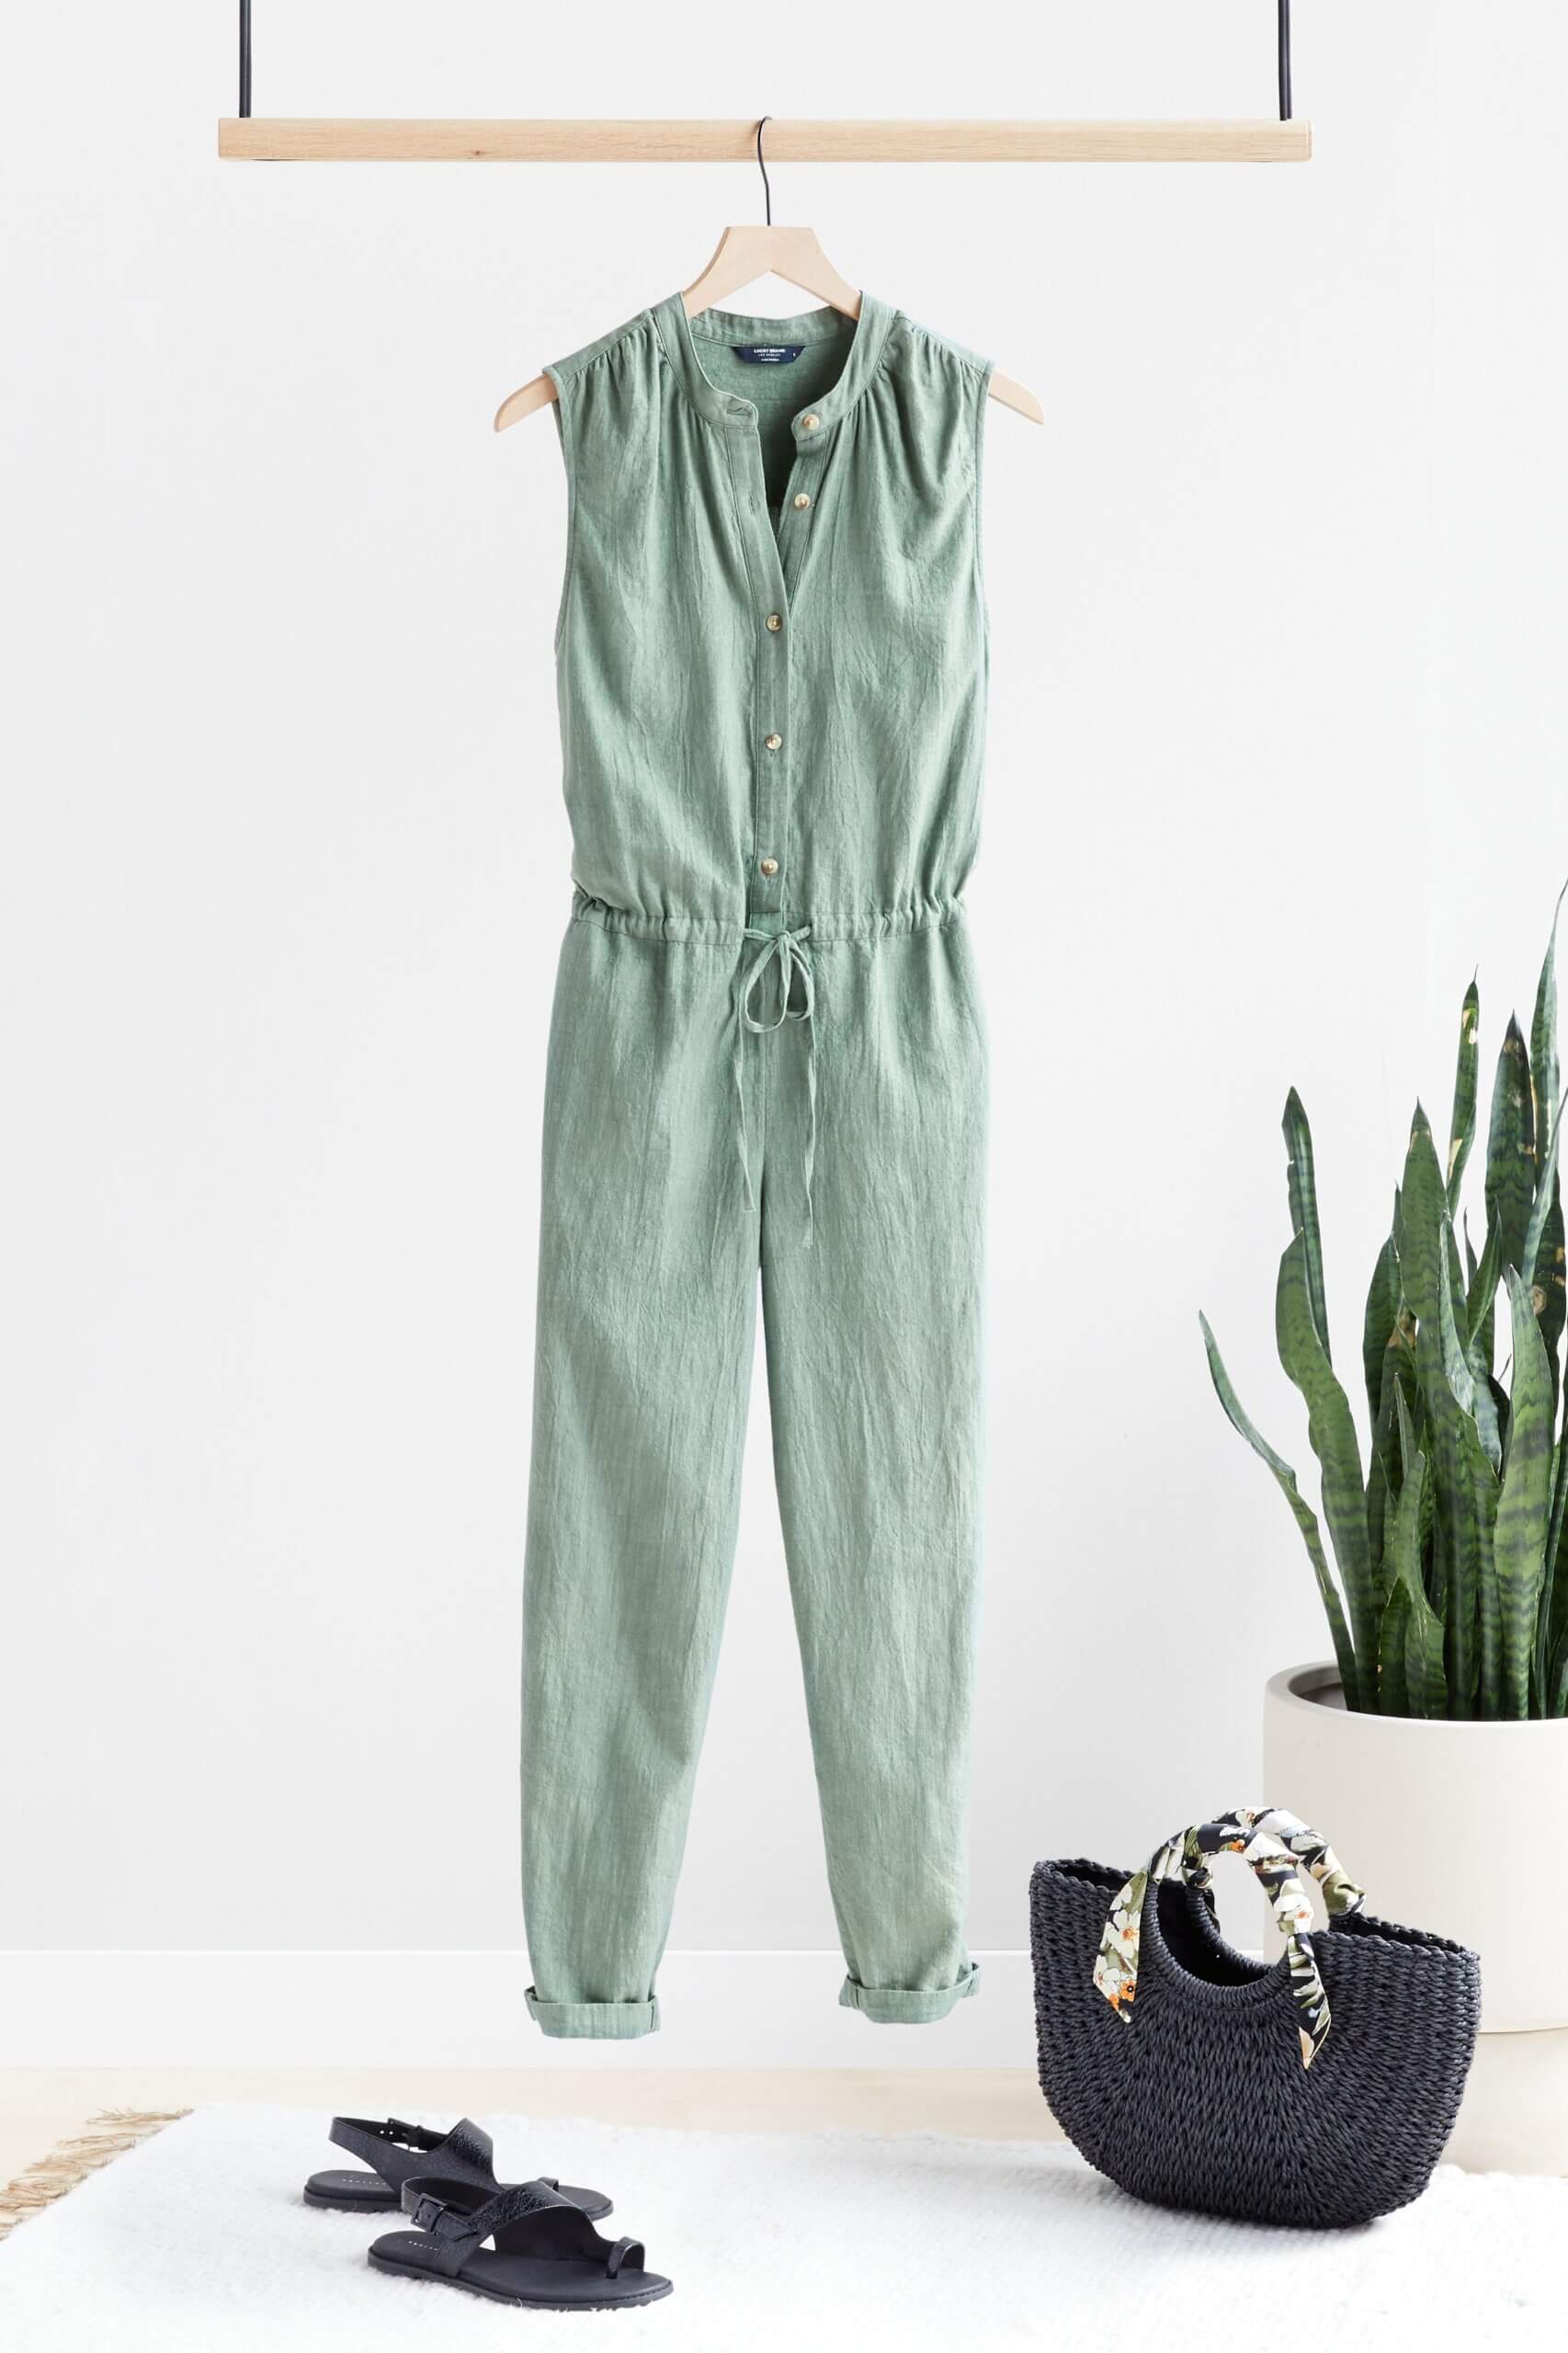 floral jumpsuits and how to style the best floral jumpsuits for spring